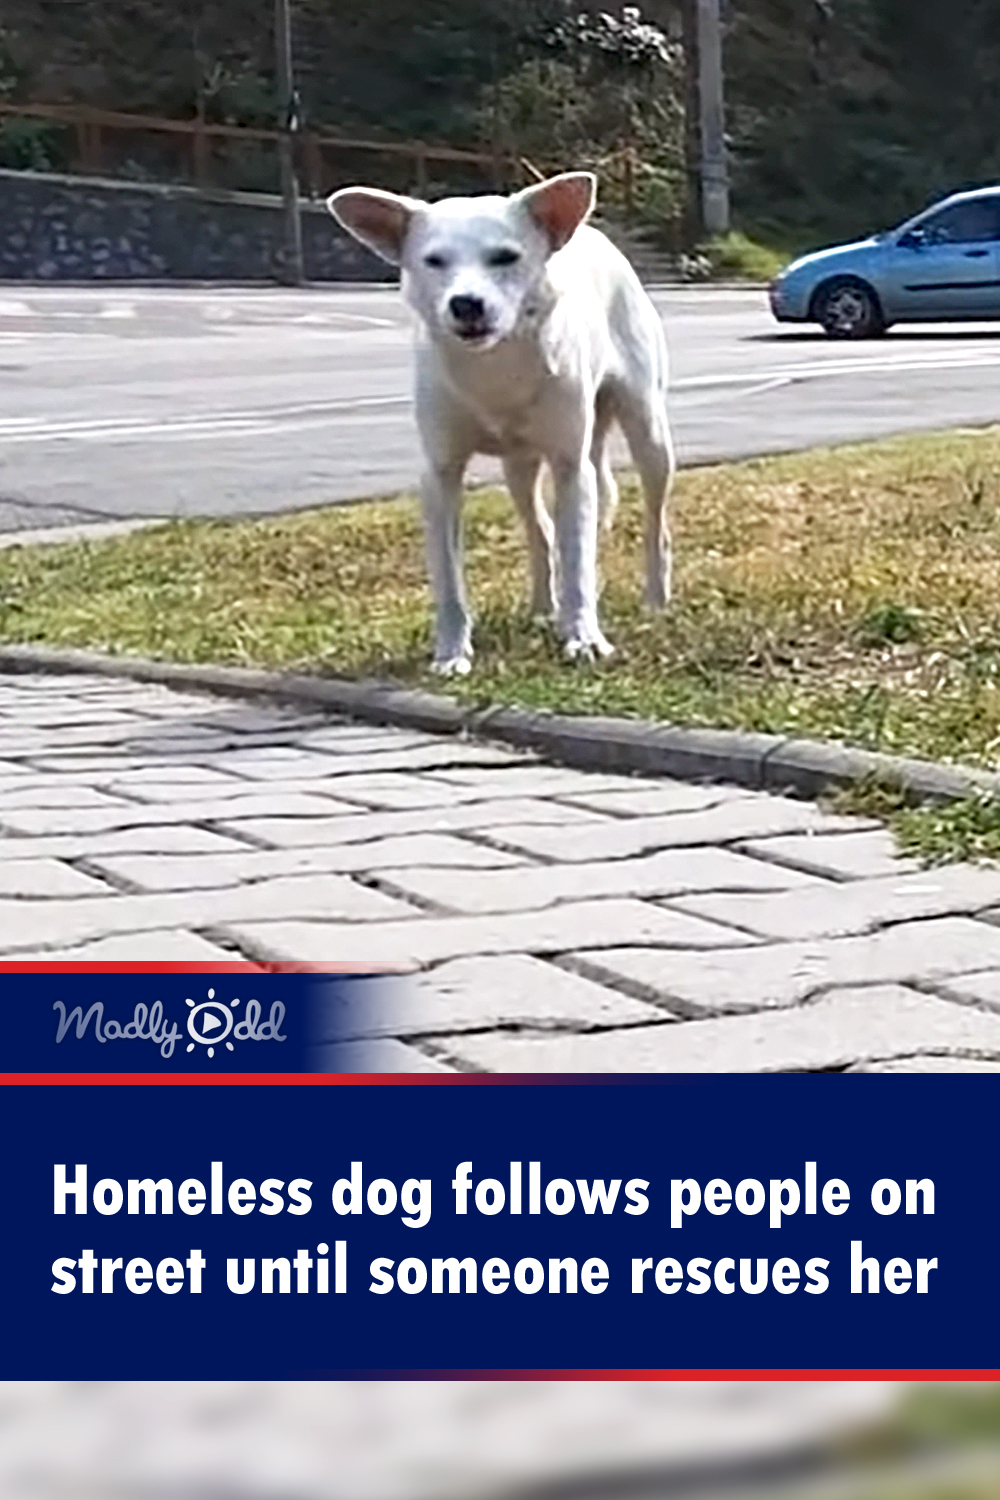 Homeless dog follows people on street until someone rescues her